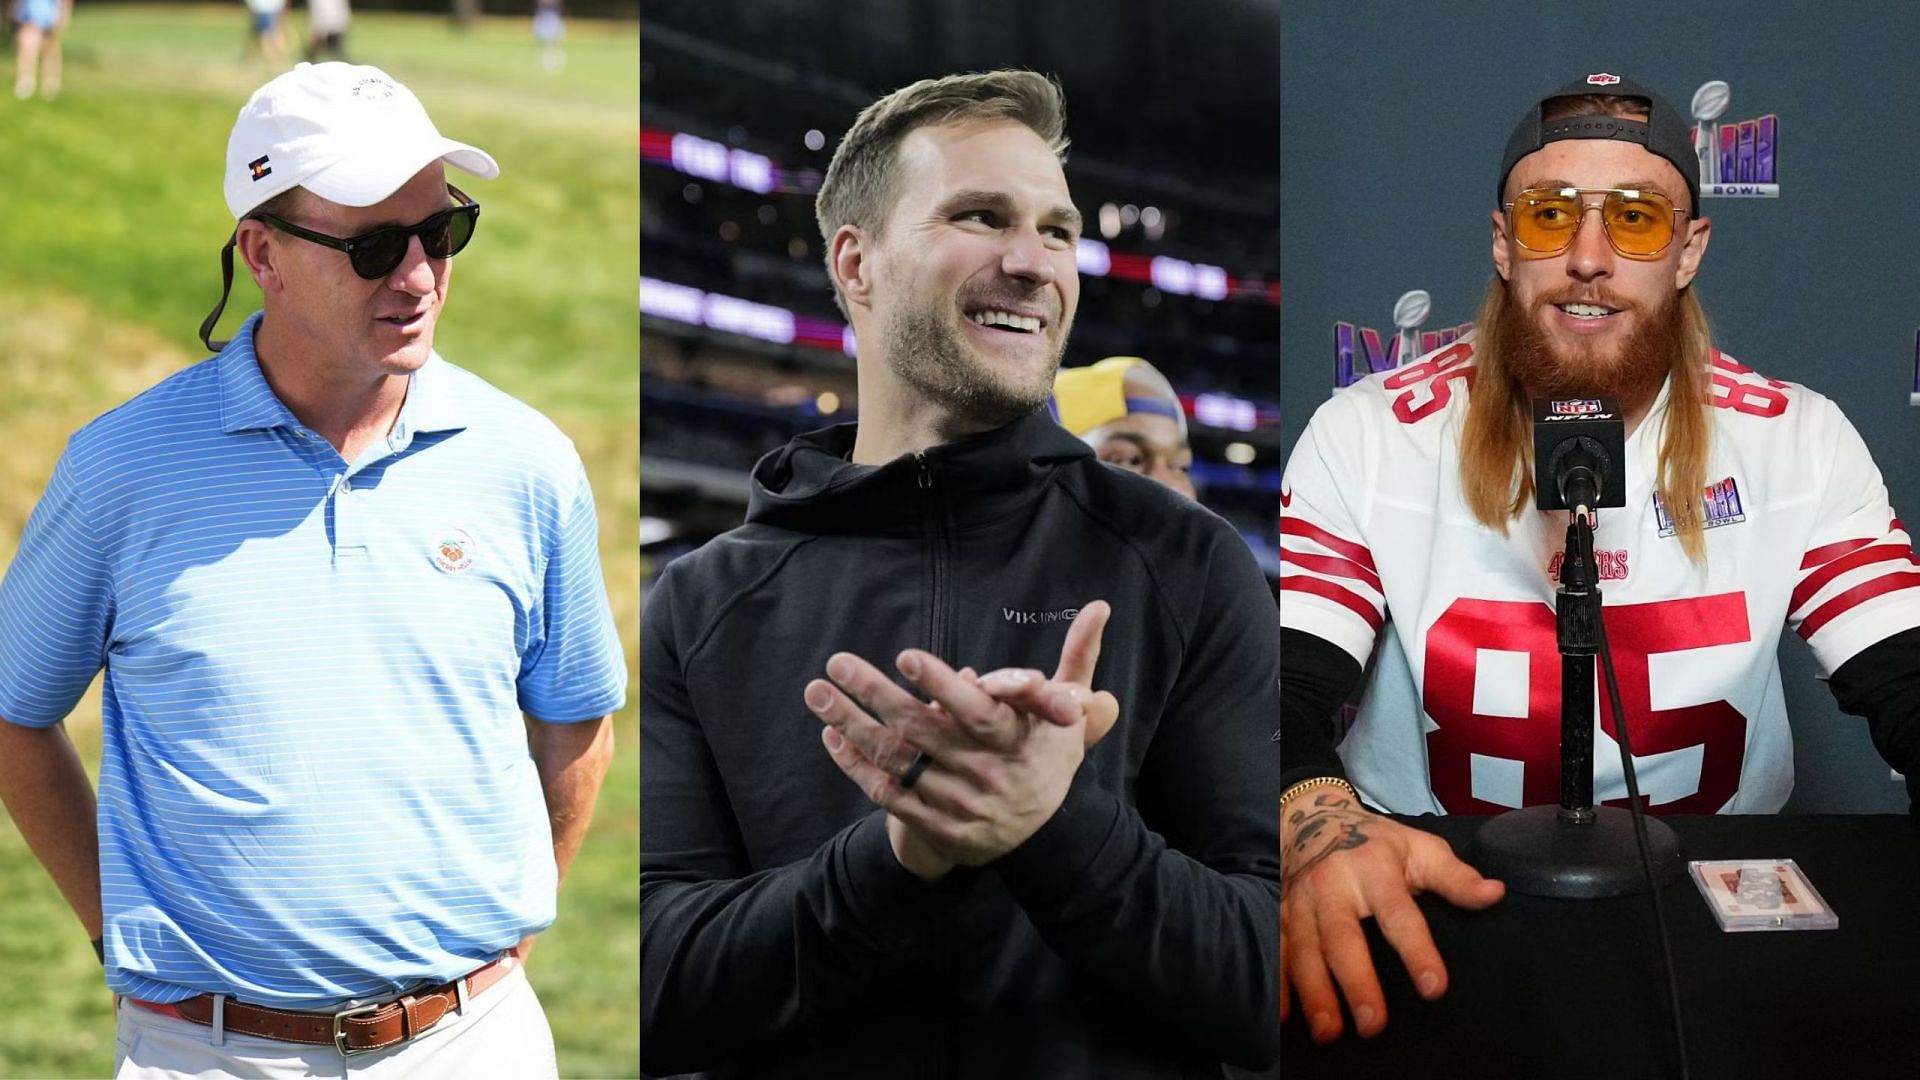 IN PHOTOS: Peyton Manning, Kirk Cousins, and George Kittle team up for 